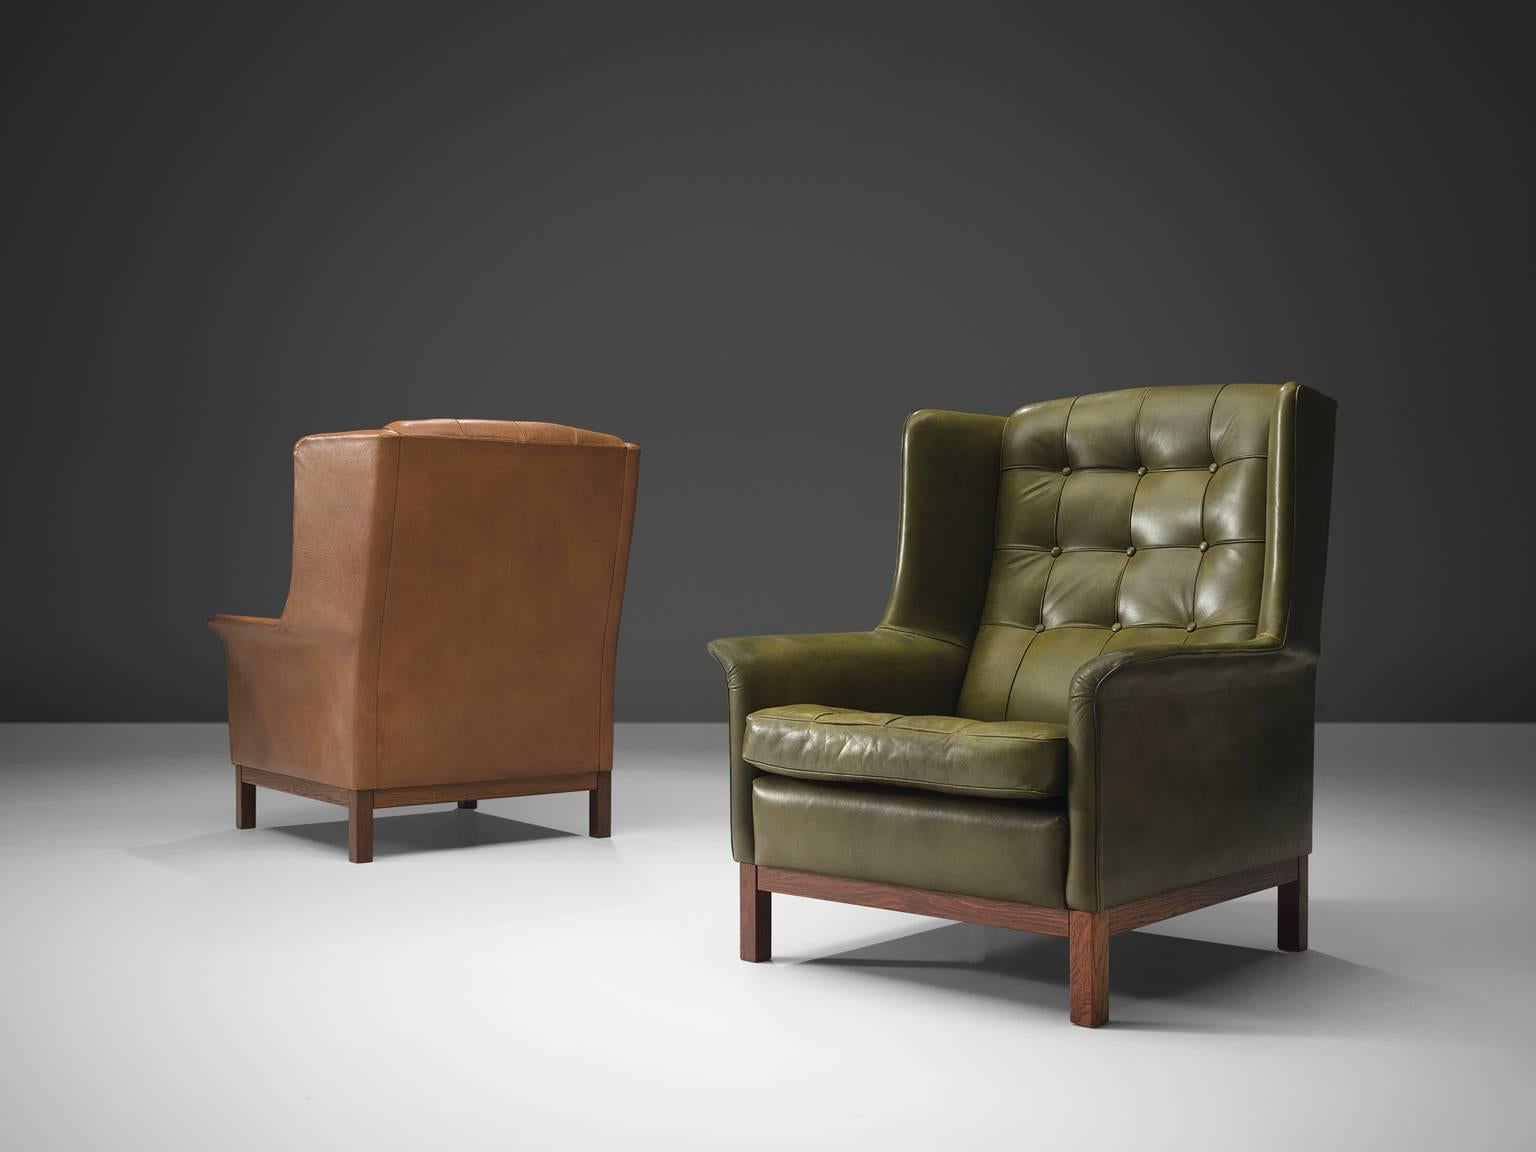 High back chairs, in leather and wood, by Arne Norell, Sweden, 1960s. 

Wonderful pair of comfortable buffalo leather easy chairs by Swedish designer Arne Norell. These lounge chairs come with a very high standard of comfort, as where Norell is